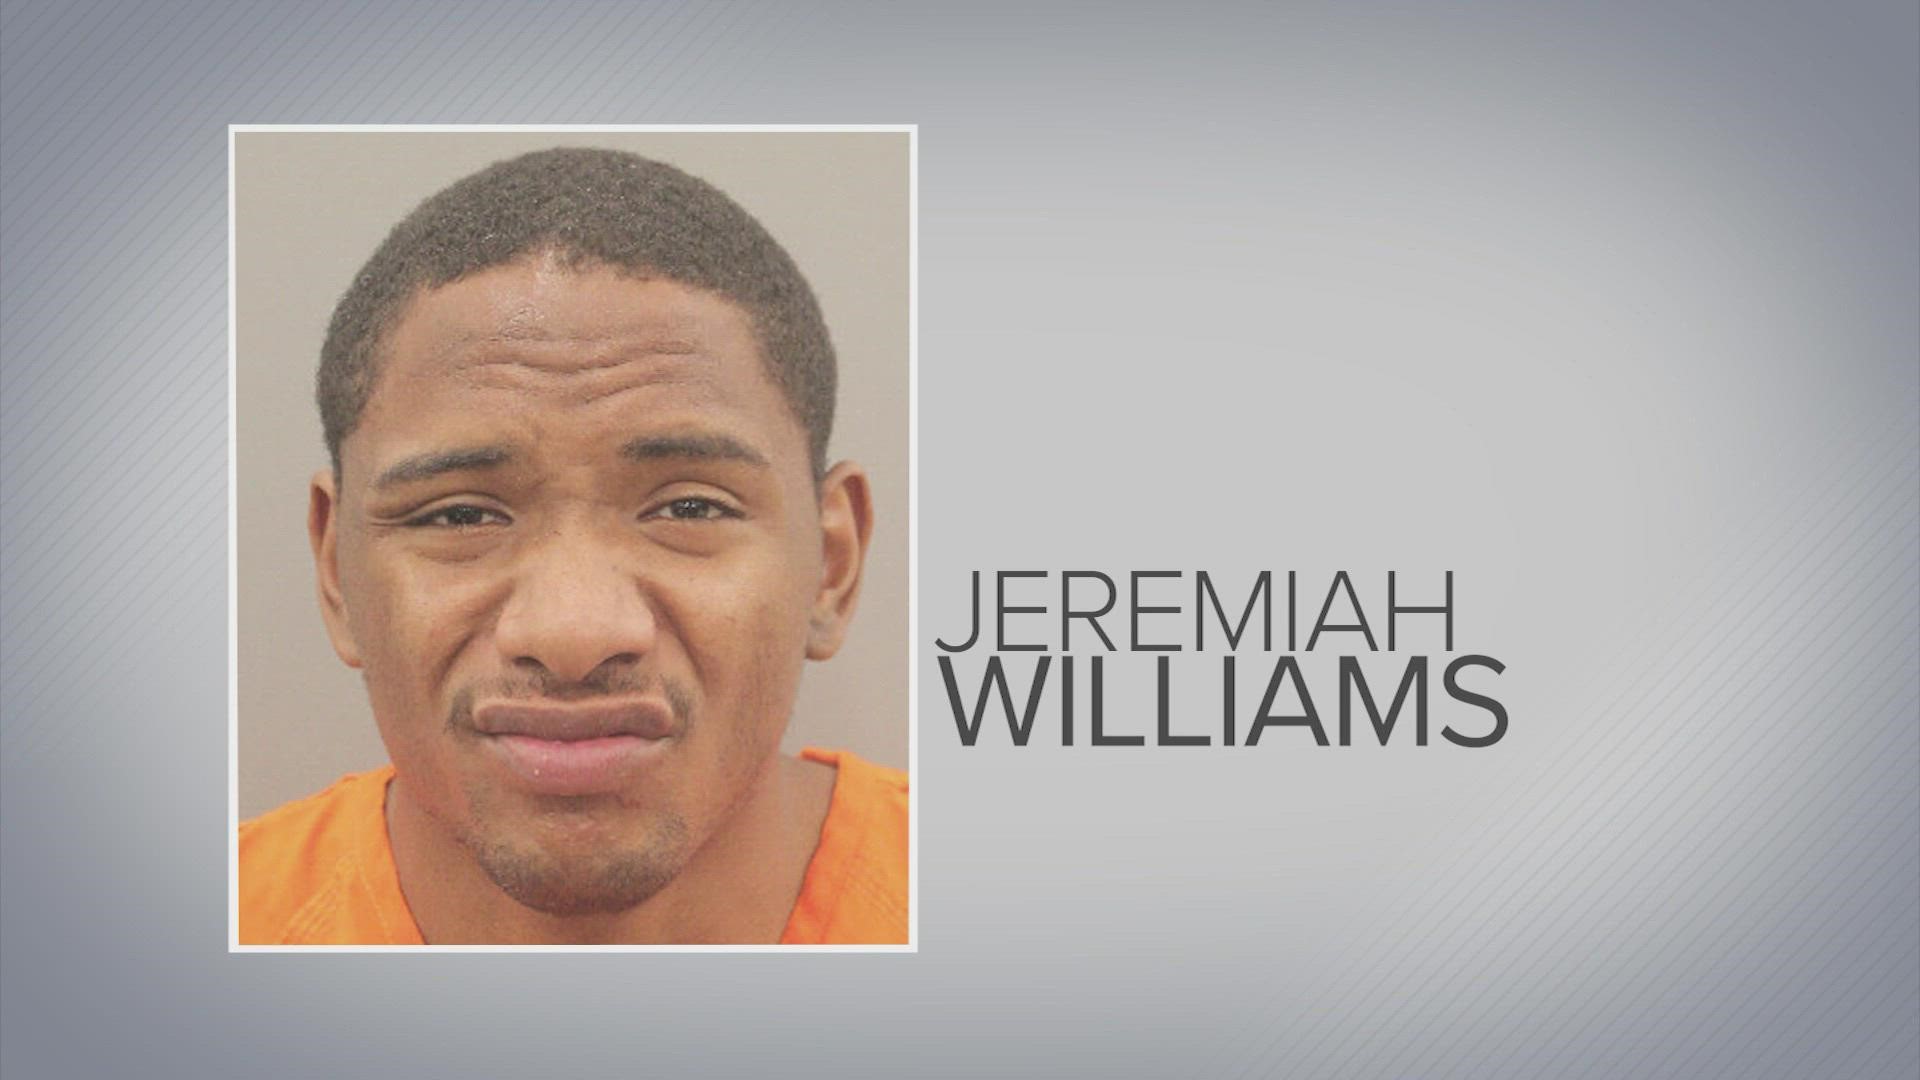 Jeremiah Williams was arrested in September for allegedly attacking two women who were jogging in a west Harris County park.